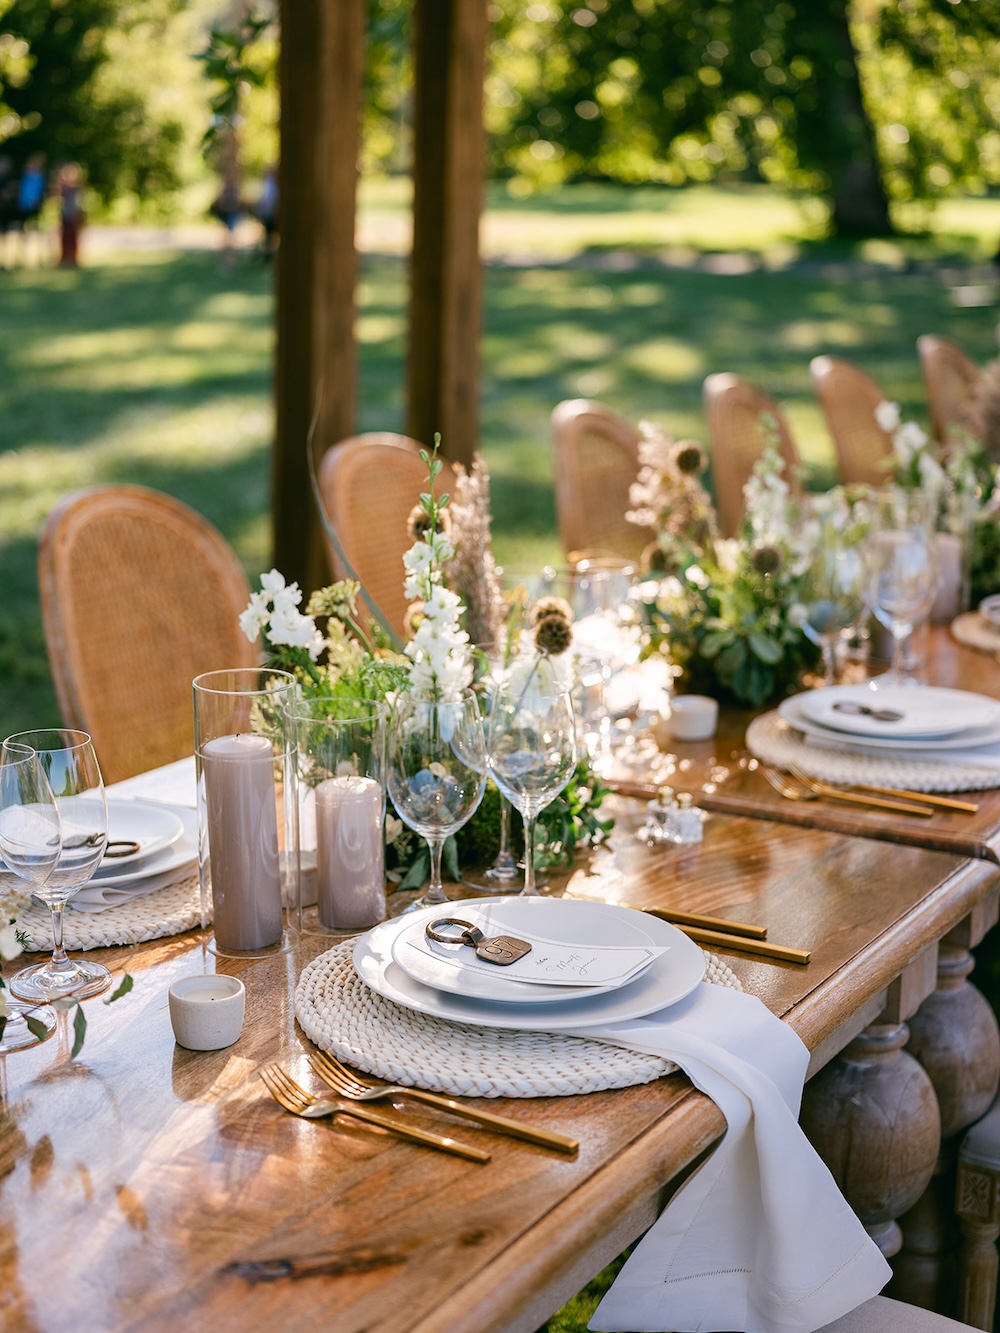 Boho chic tablescape, neutral tones place setting. Milestone birthday party celebration weekend in Middleburg, Virginia. Sarah Bradshaw Photography.